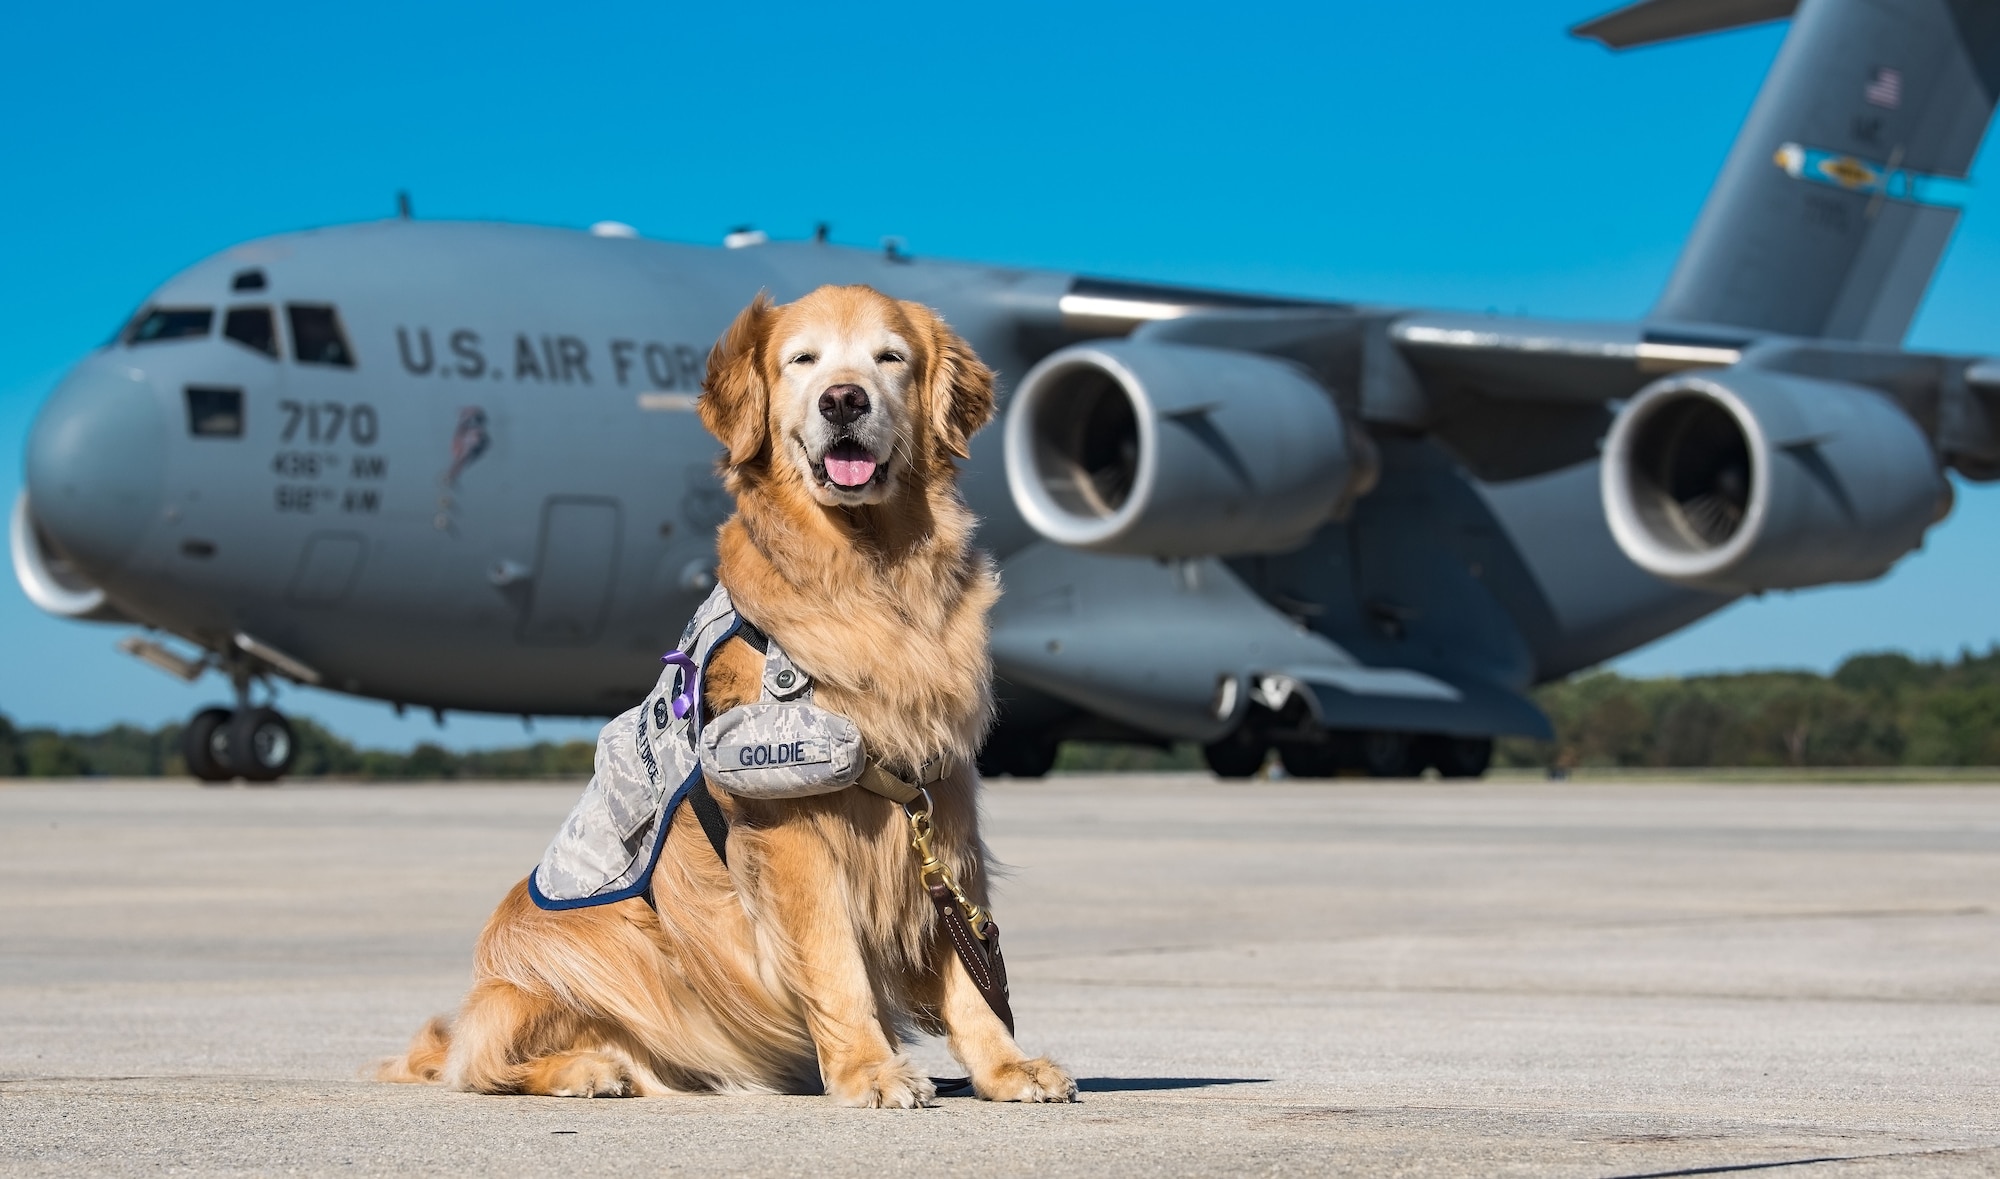 Lt. Col. Goldie poses for a photo on the flight line in front of a C-17 Globemaster III, Oct. 20, 2017, on Dover Air Force Base, Del. Goldie, the only U.S. Air Force therapy dog, is stationed at Walter Reed National Military Medical Center, Bethesda, Md., and took part in the 436th Medical Operations Squadron Family Advocacy Domestic Violence Awareness Month outreach by visiting Team Dover personnel. (U.S. Air Force photo by Roland Balik)